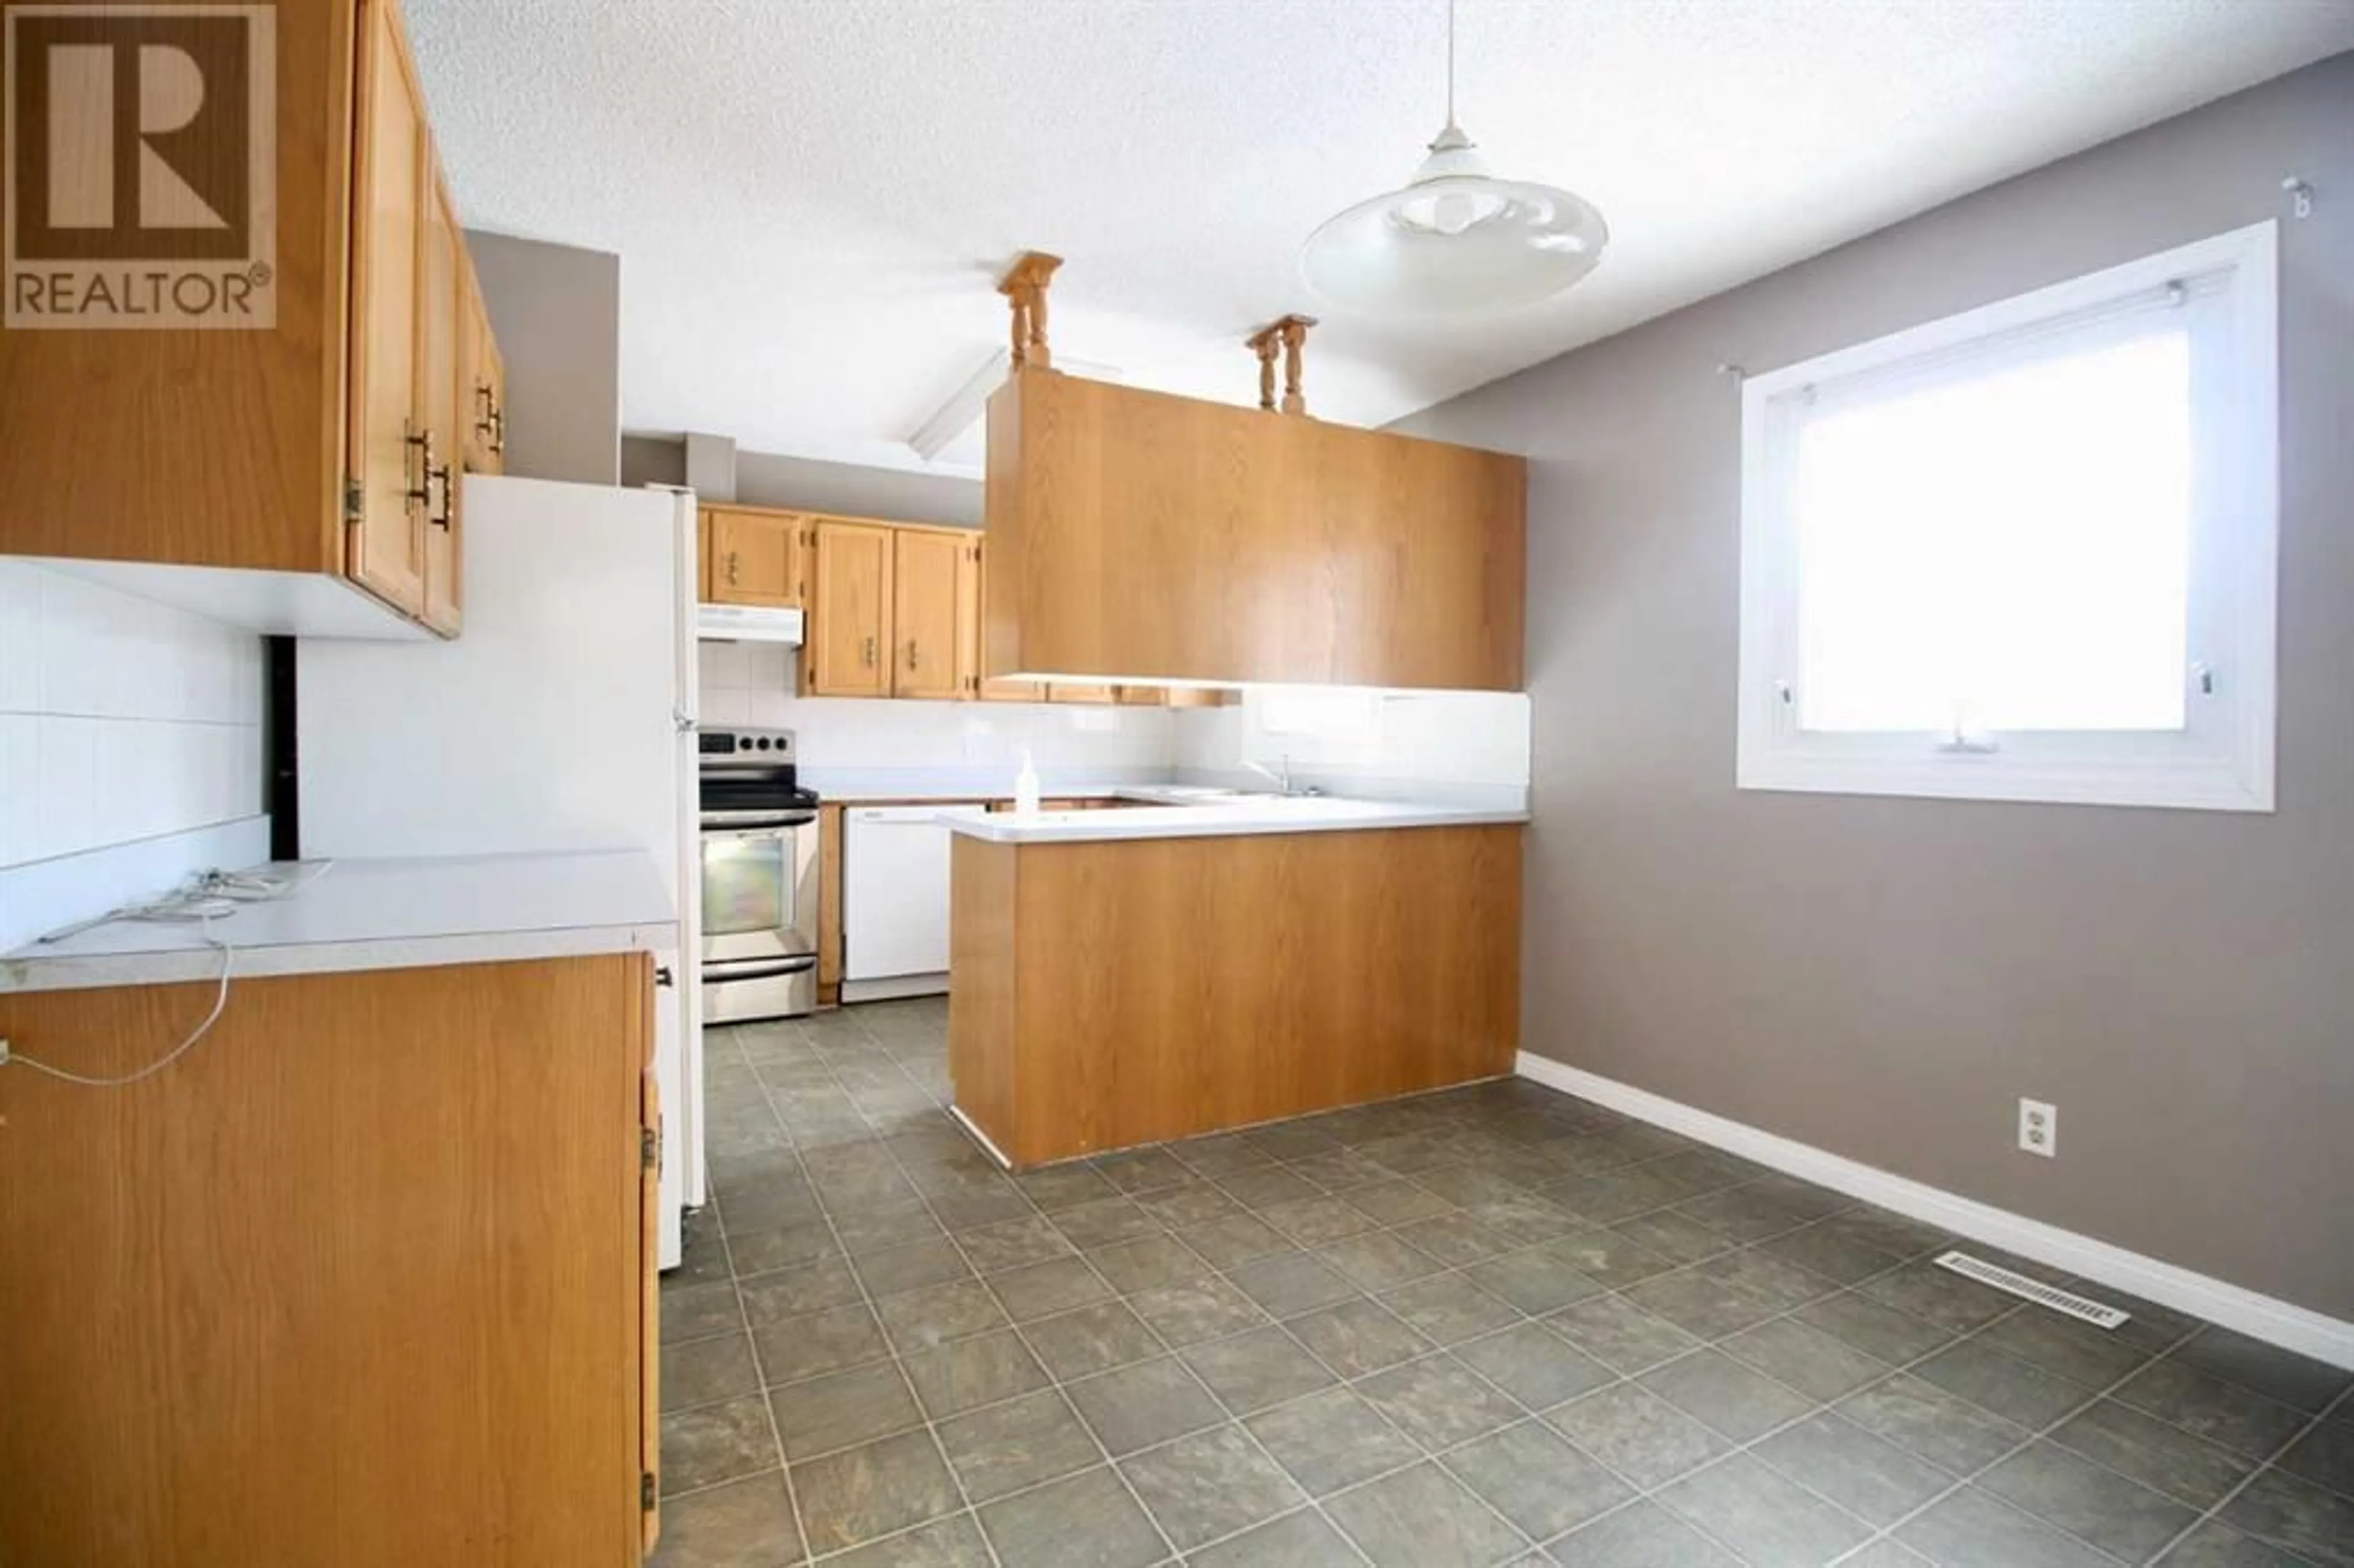 Standard kitchen for 16 Discovery Crescent, Rainbow Lake Alberta T0H2Y0